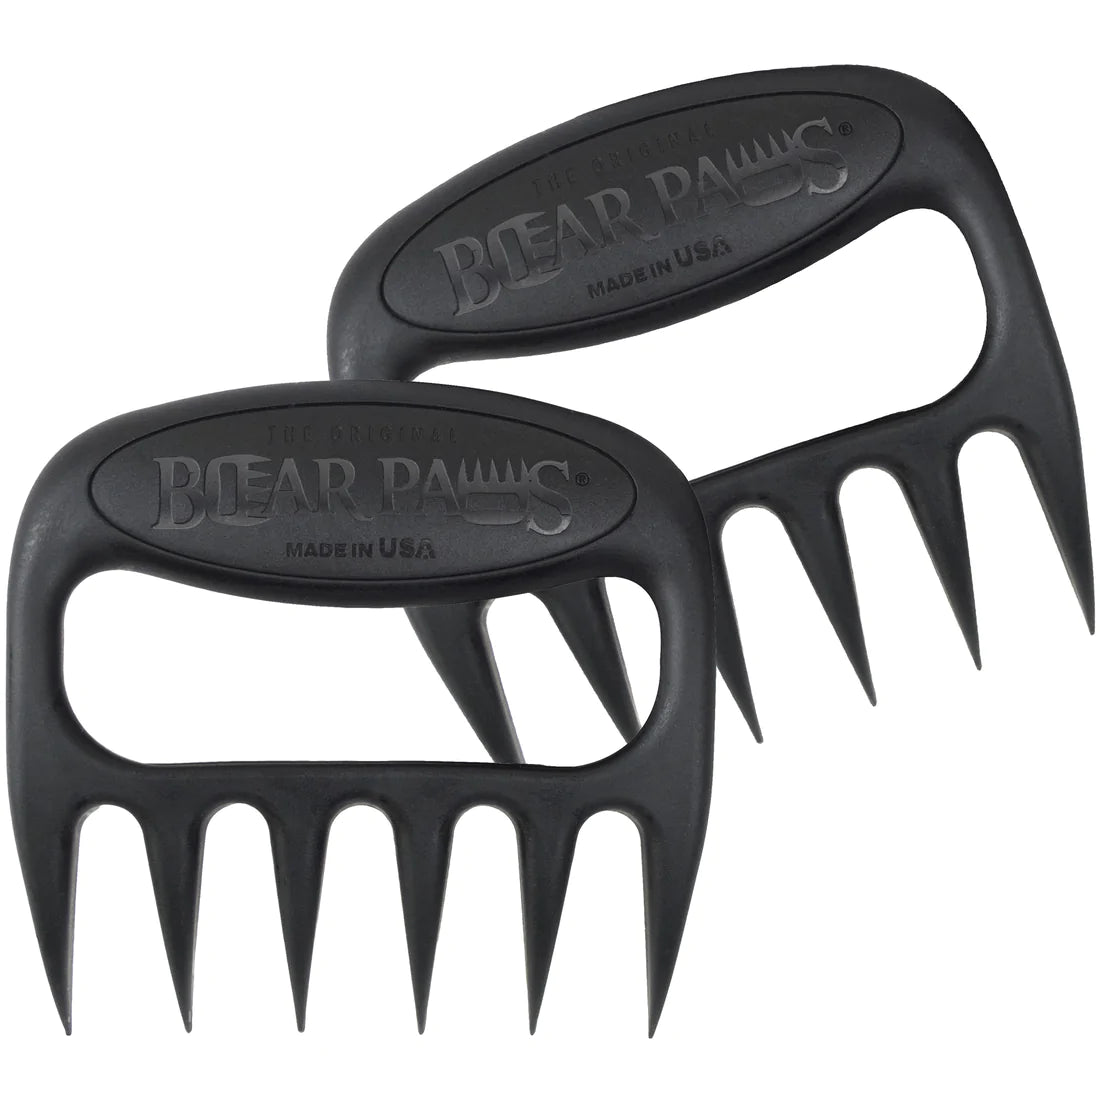 What are Bear Paws Meat Shredder Claws